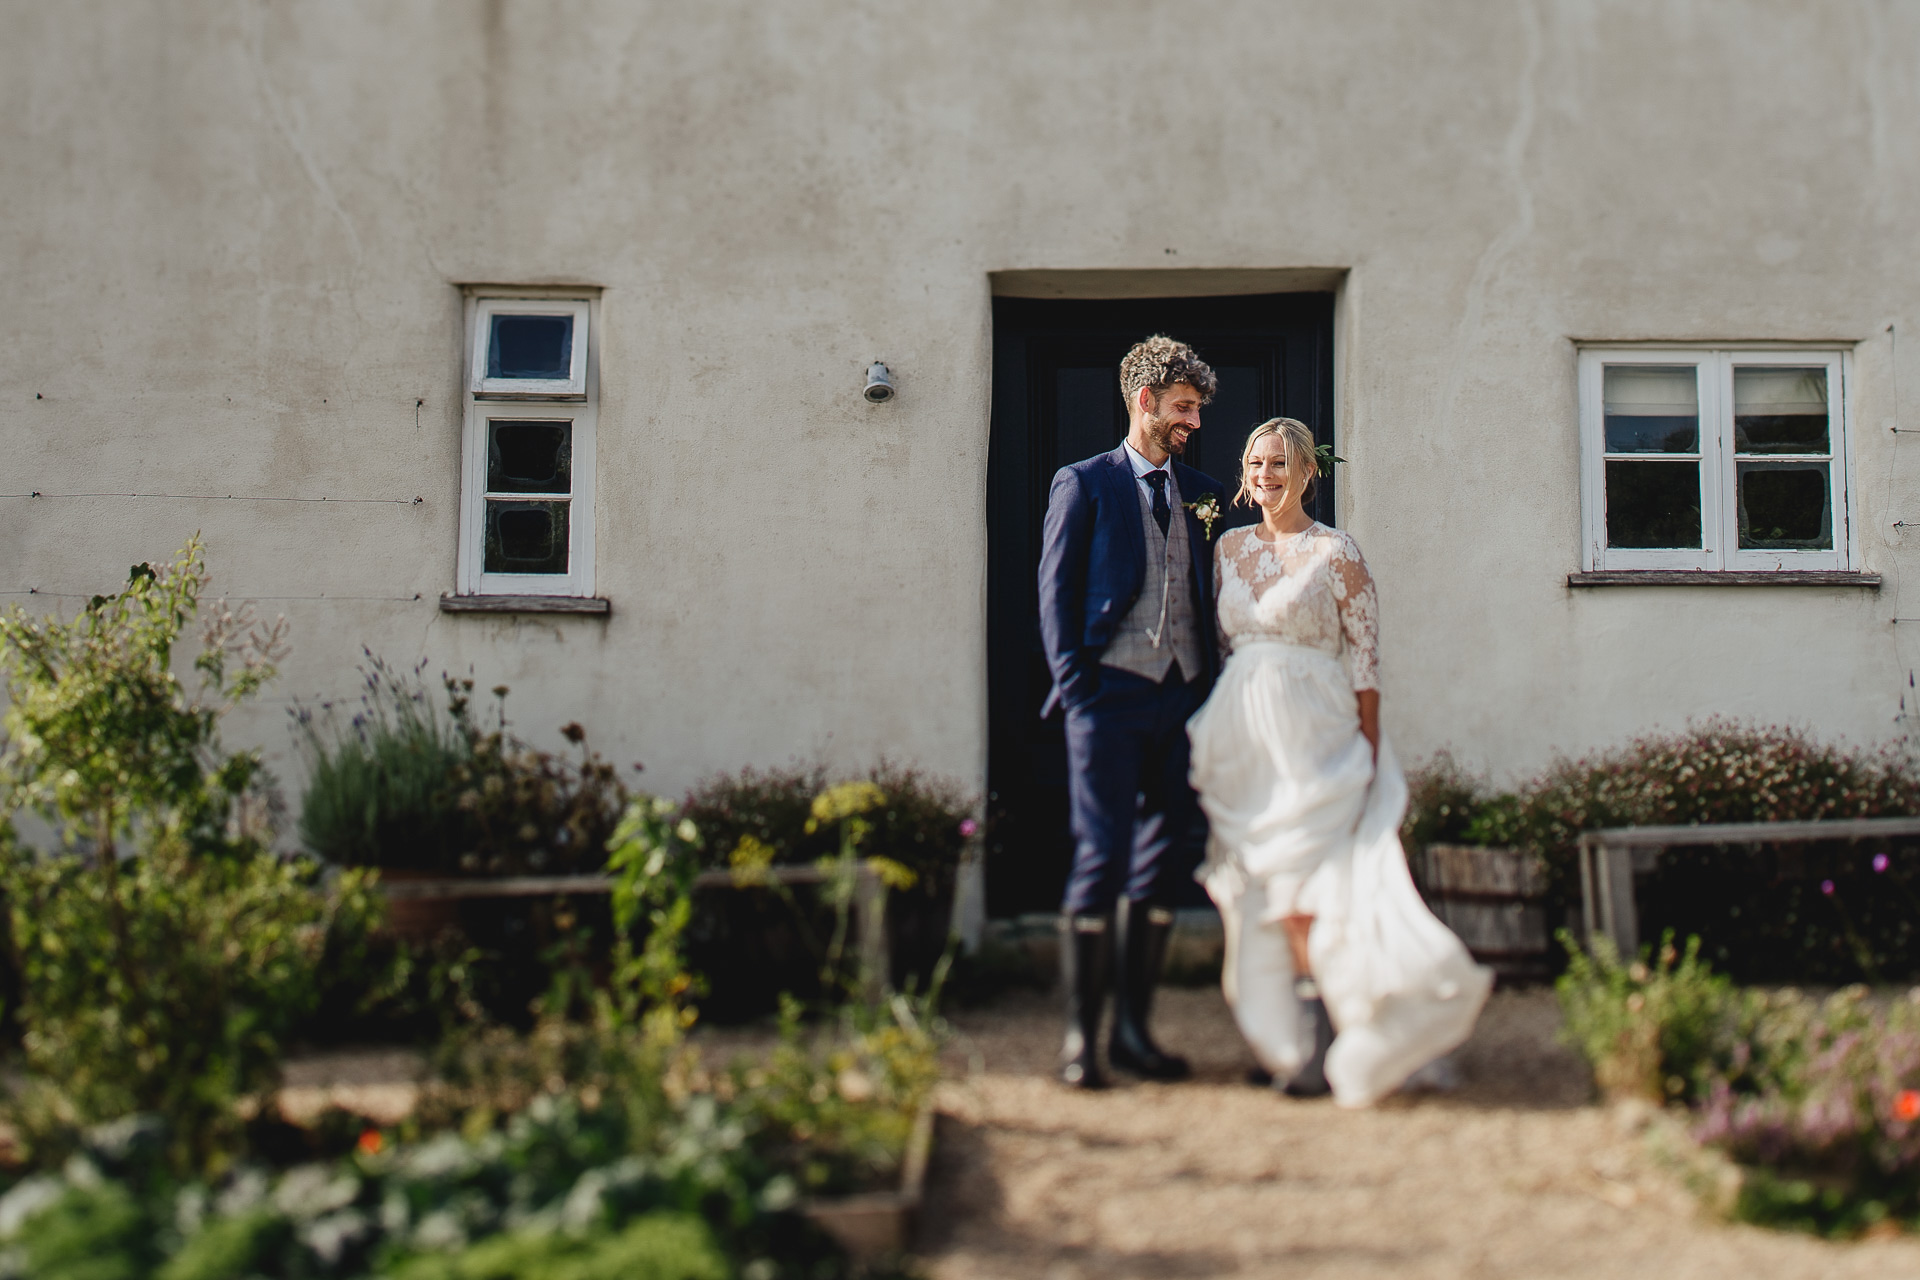 Bride and groom in wellies outside River Cottage farmhouse